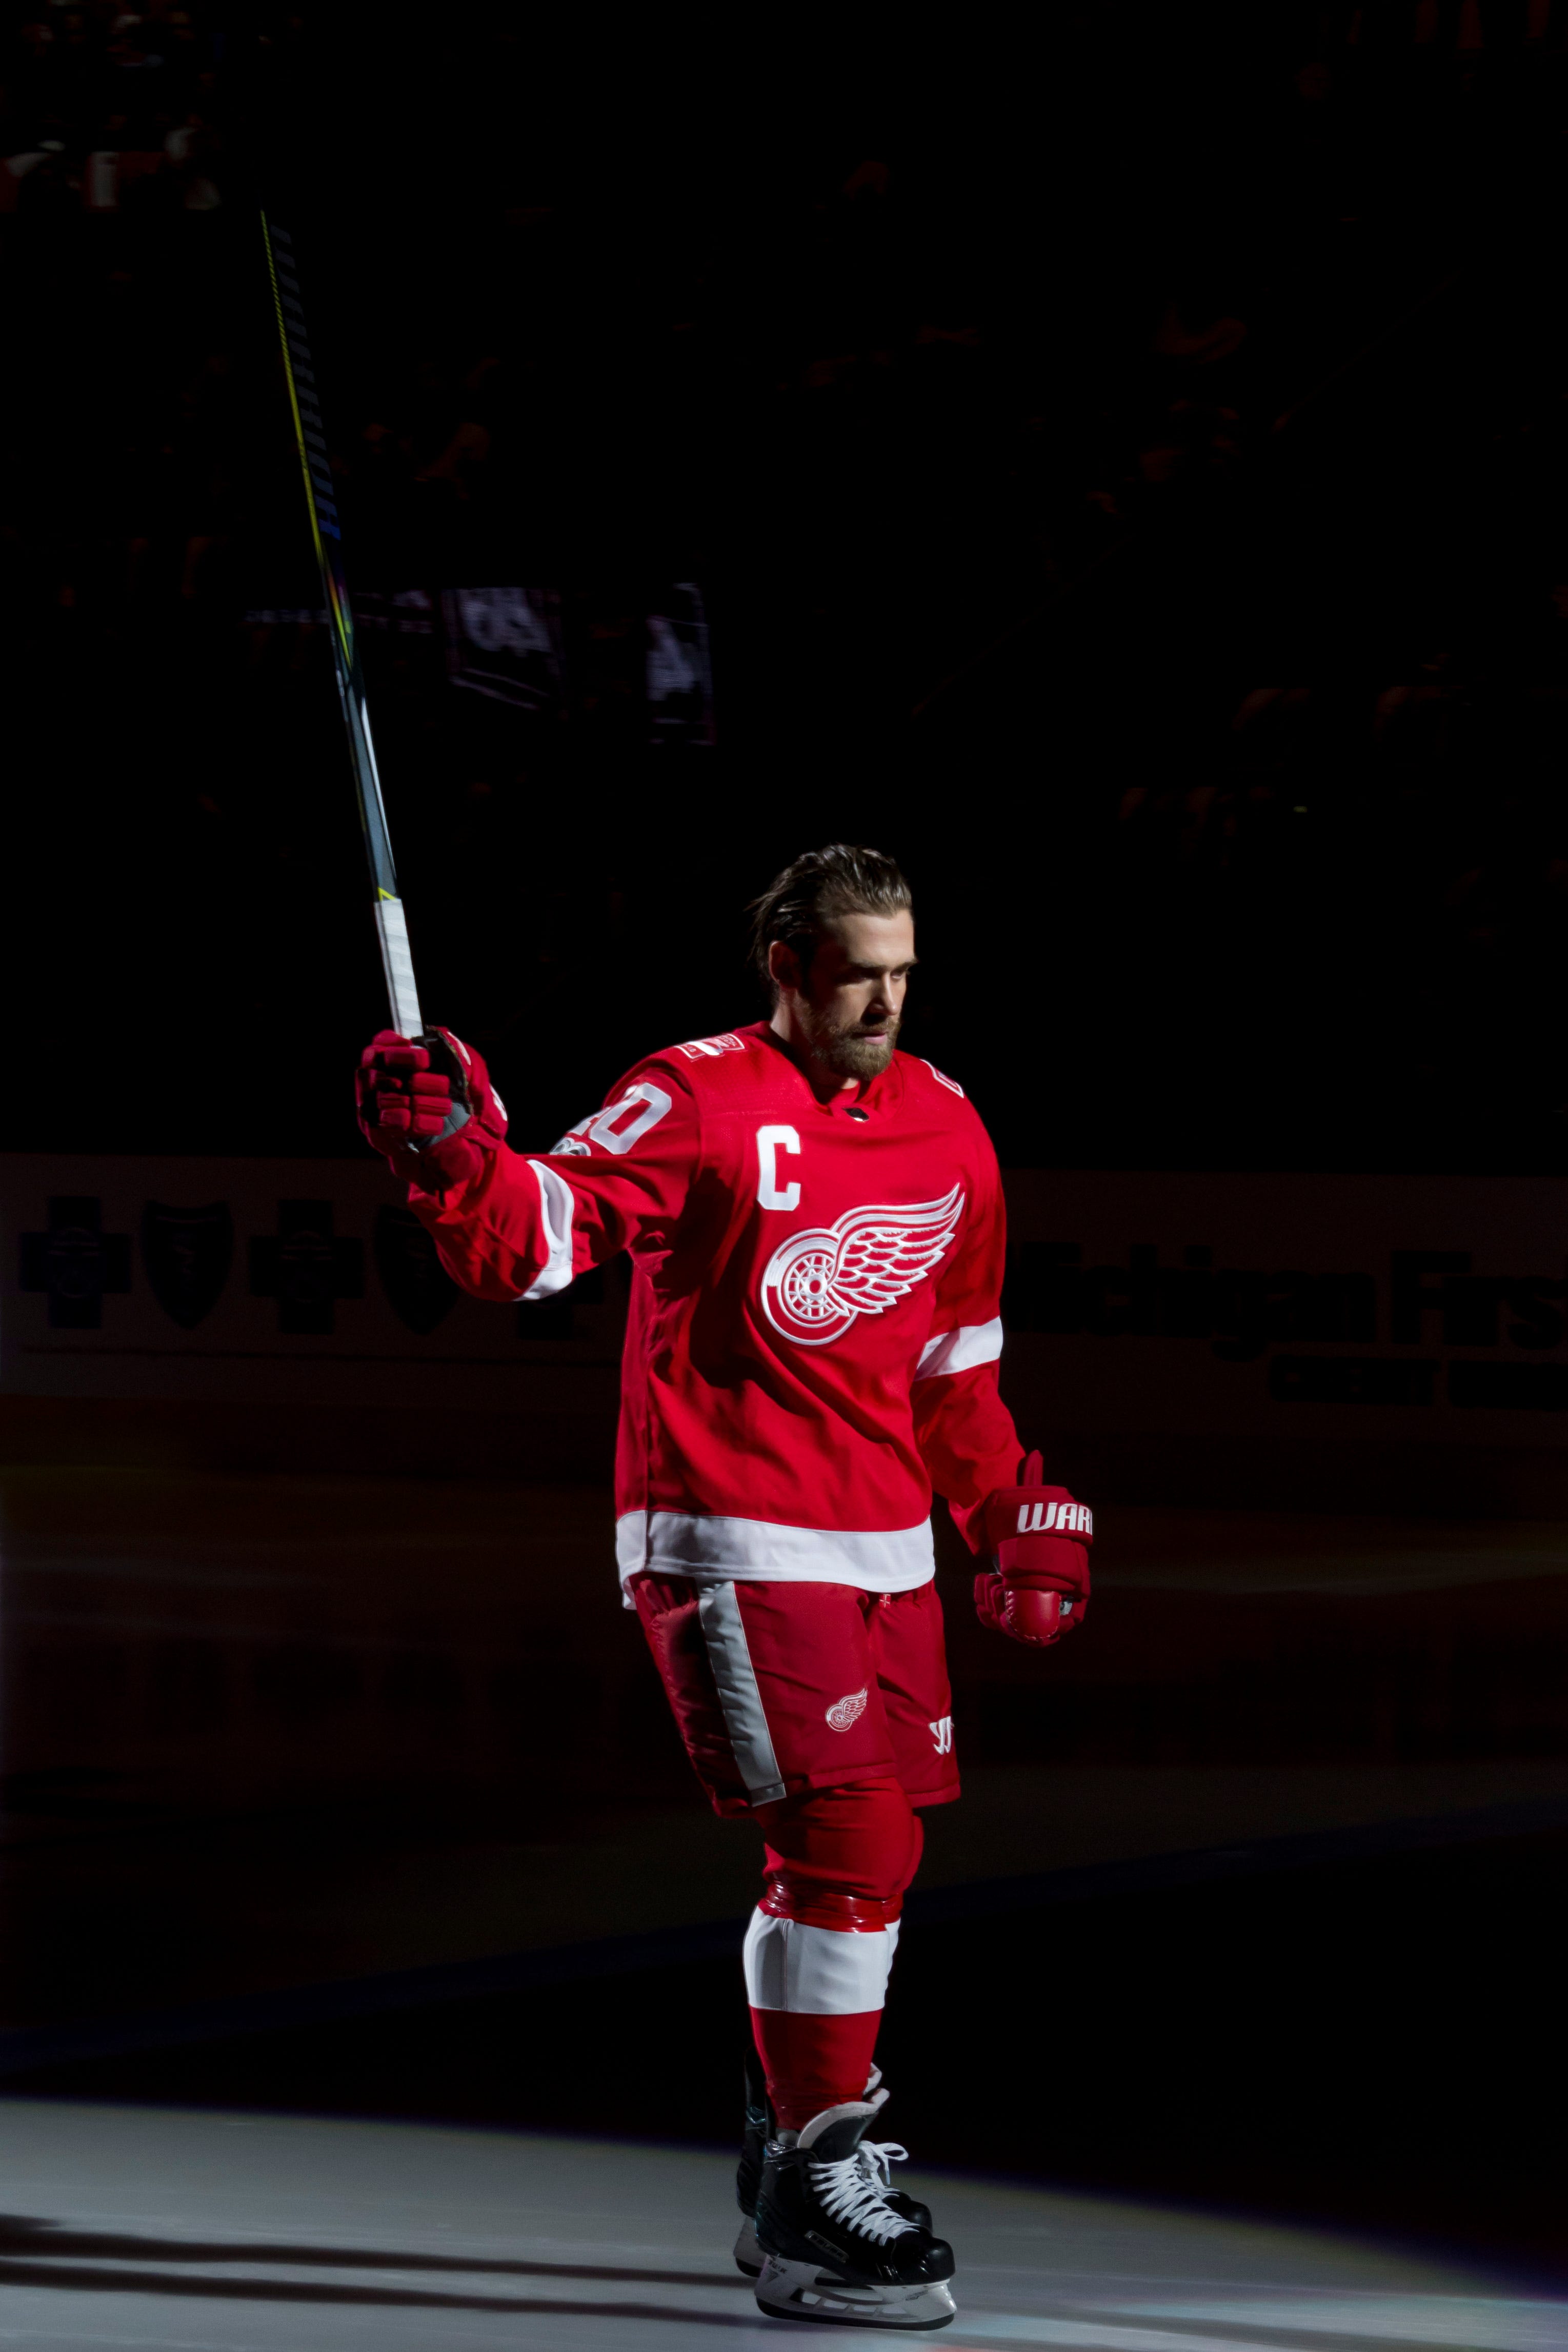 Detroit left wing Henrik Zetterberg is introduced before the start of the first regular season game at Little Caesars Arena against the Minnesota Wild on Oct. 5, 2017.